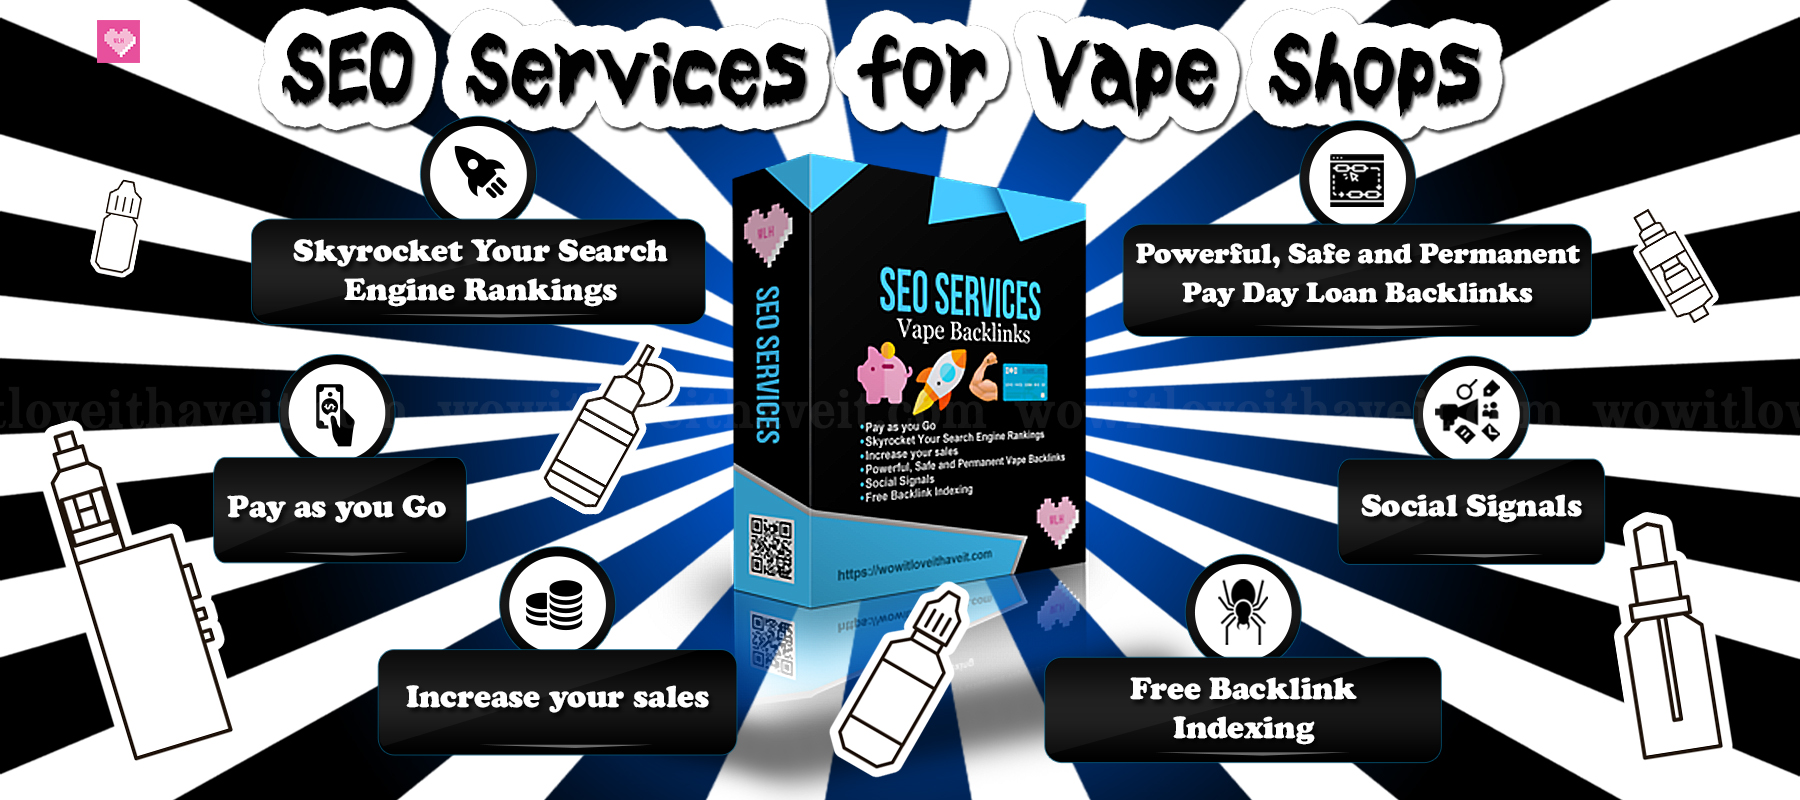 vapepromoter i will give you global vape shop database 60 countries